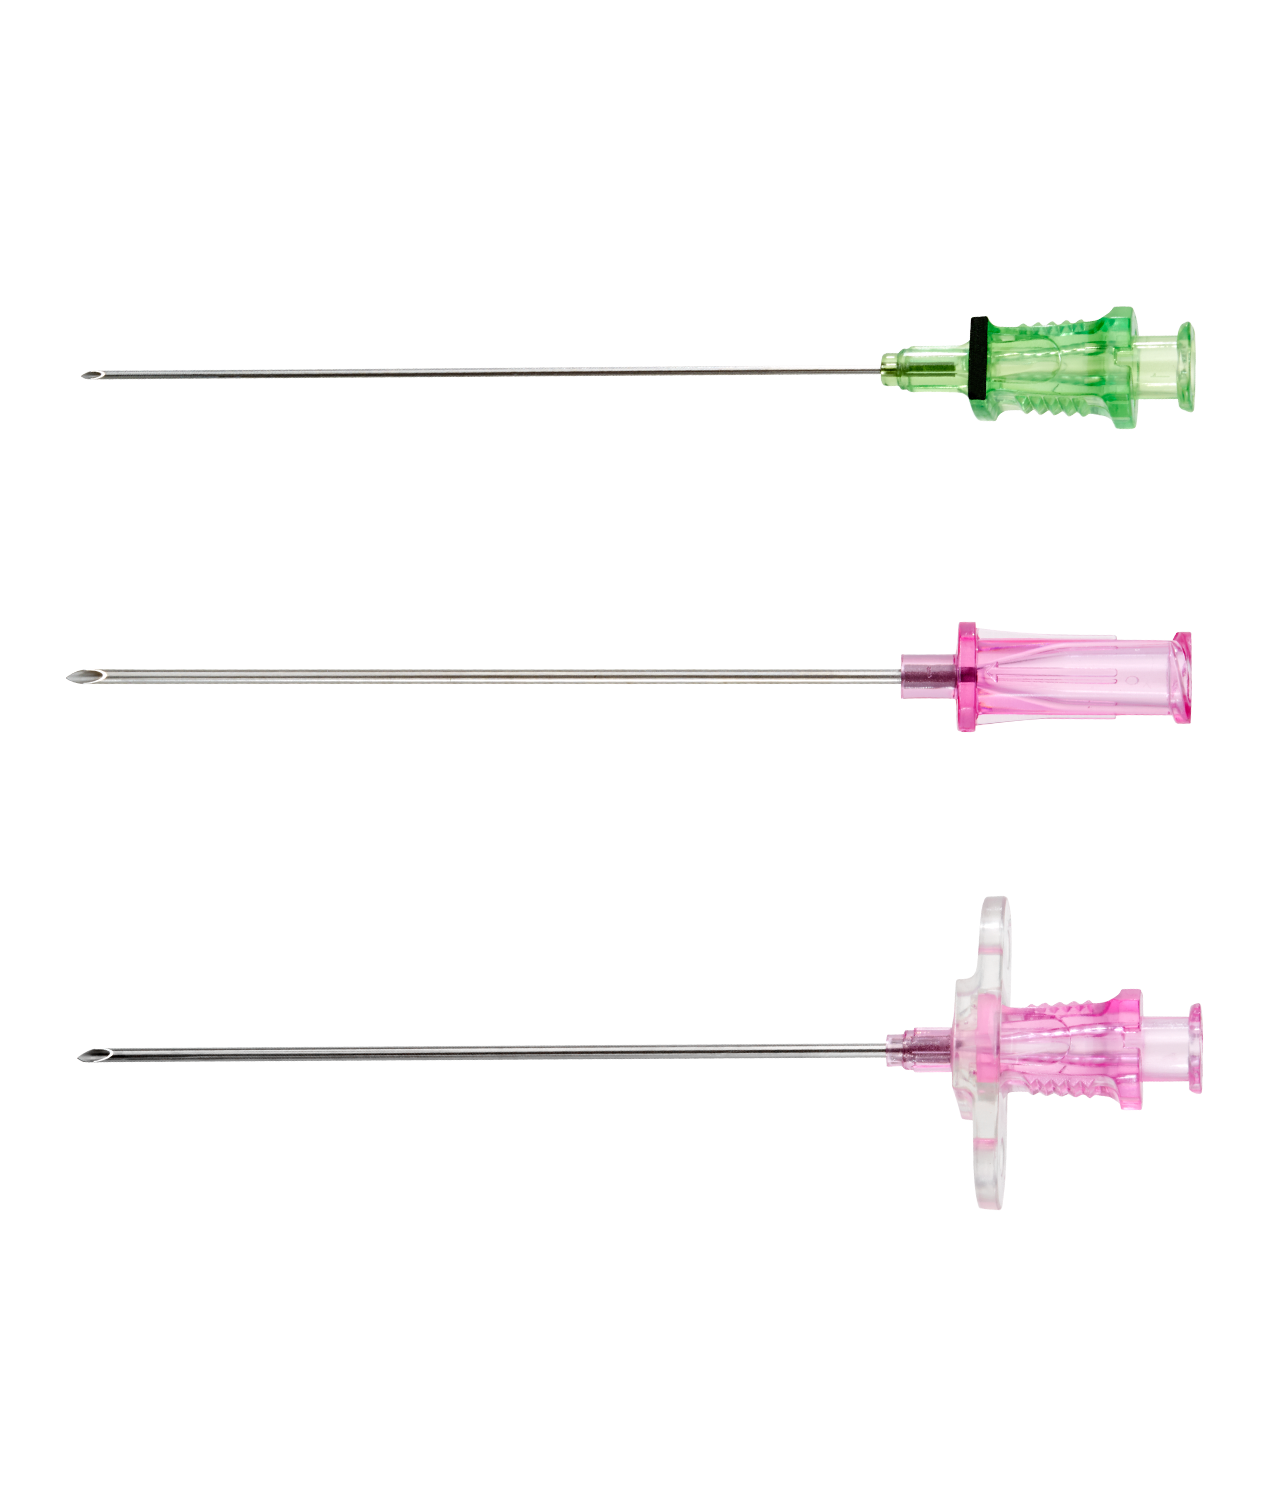 Guidewire Introducer Needles (GWI)